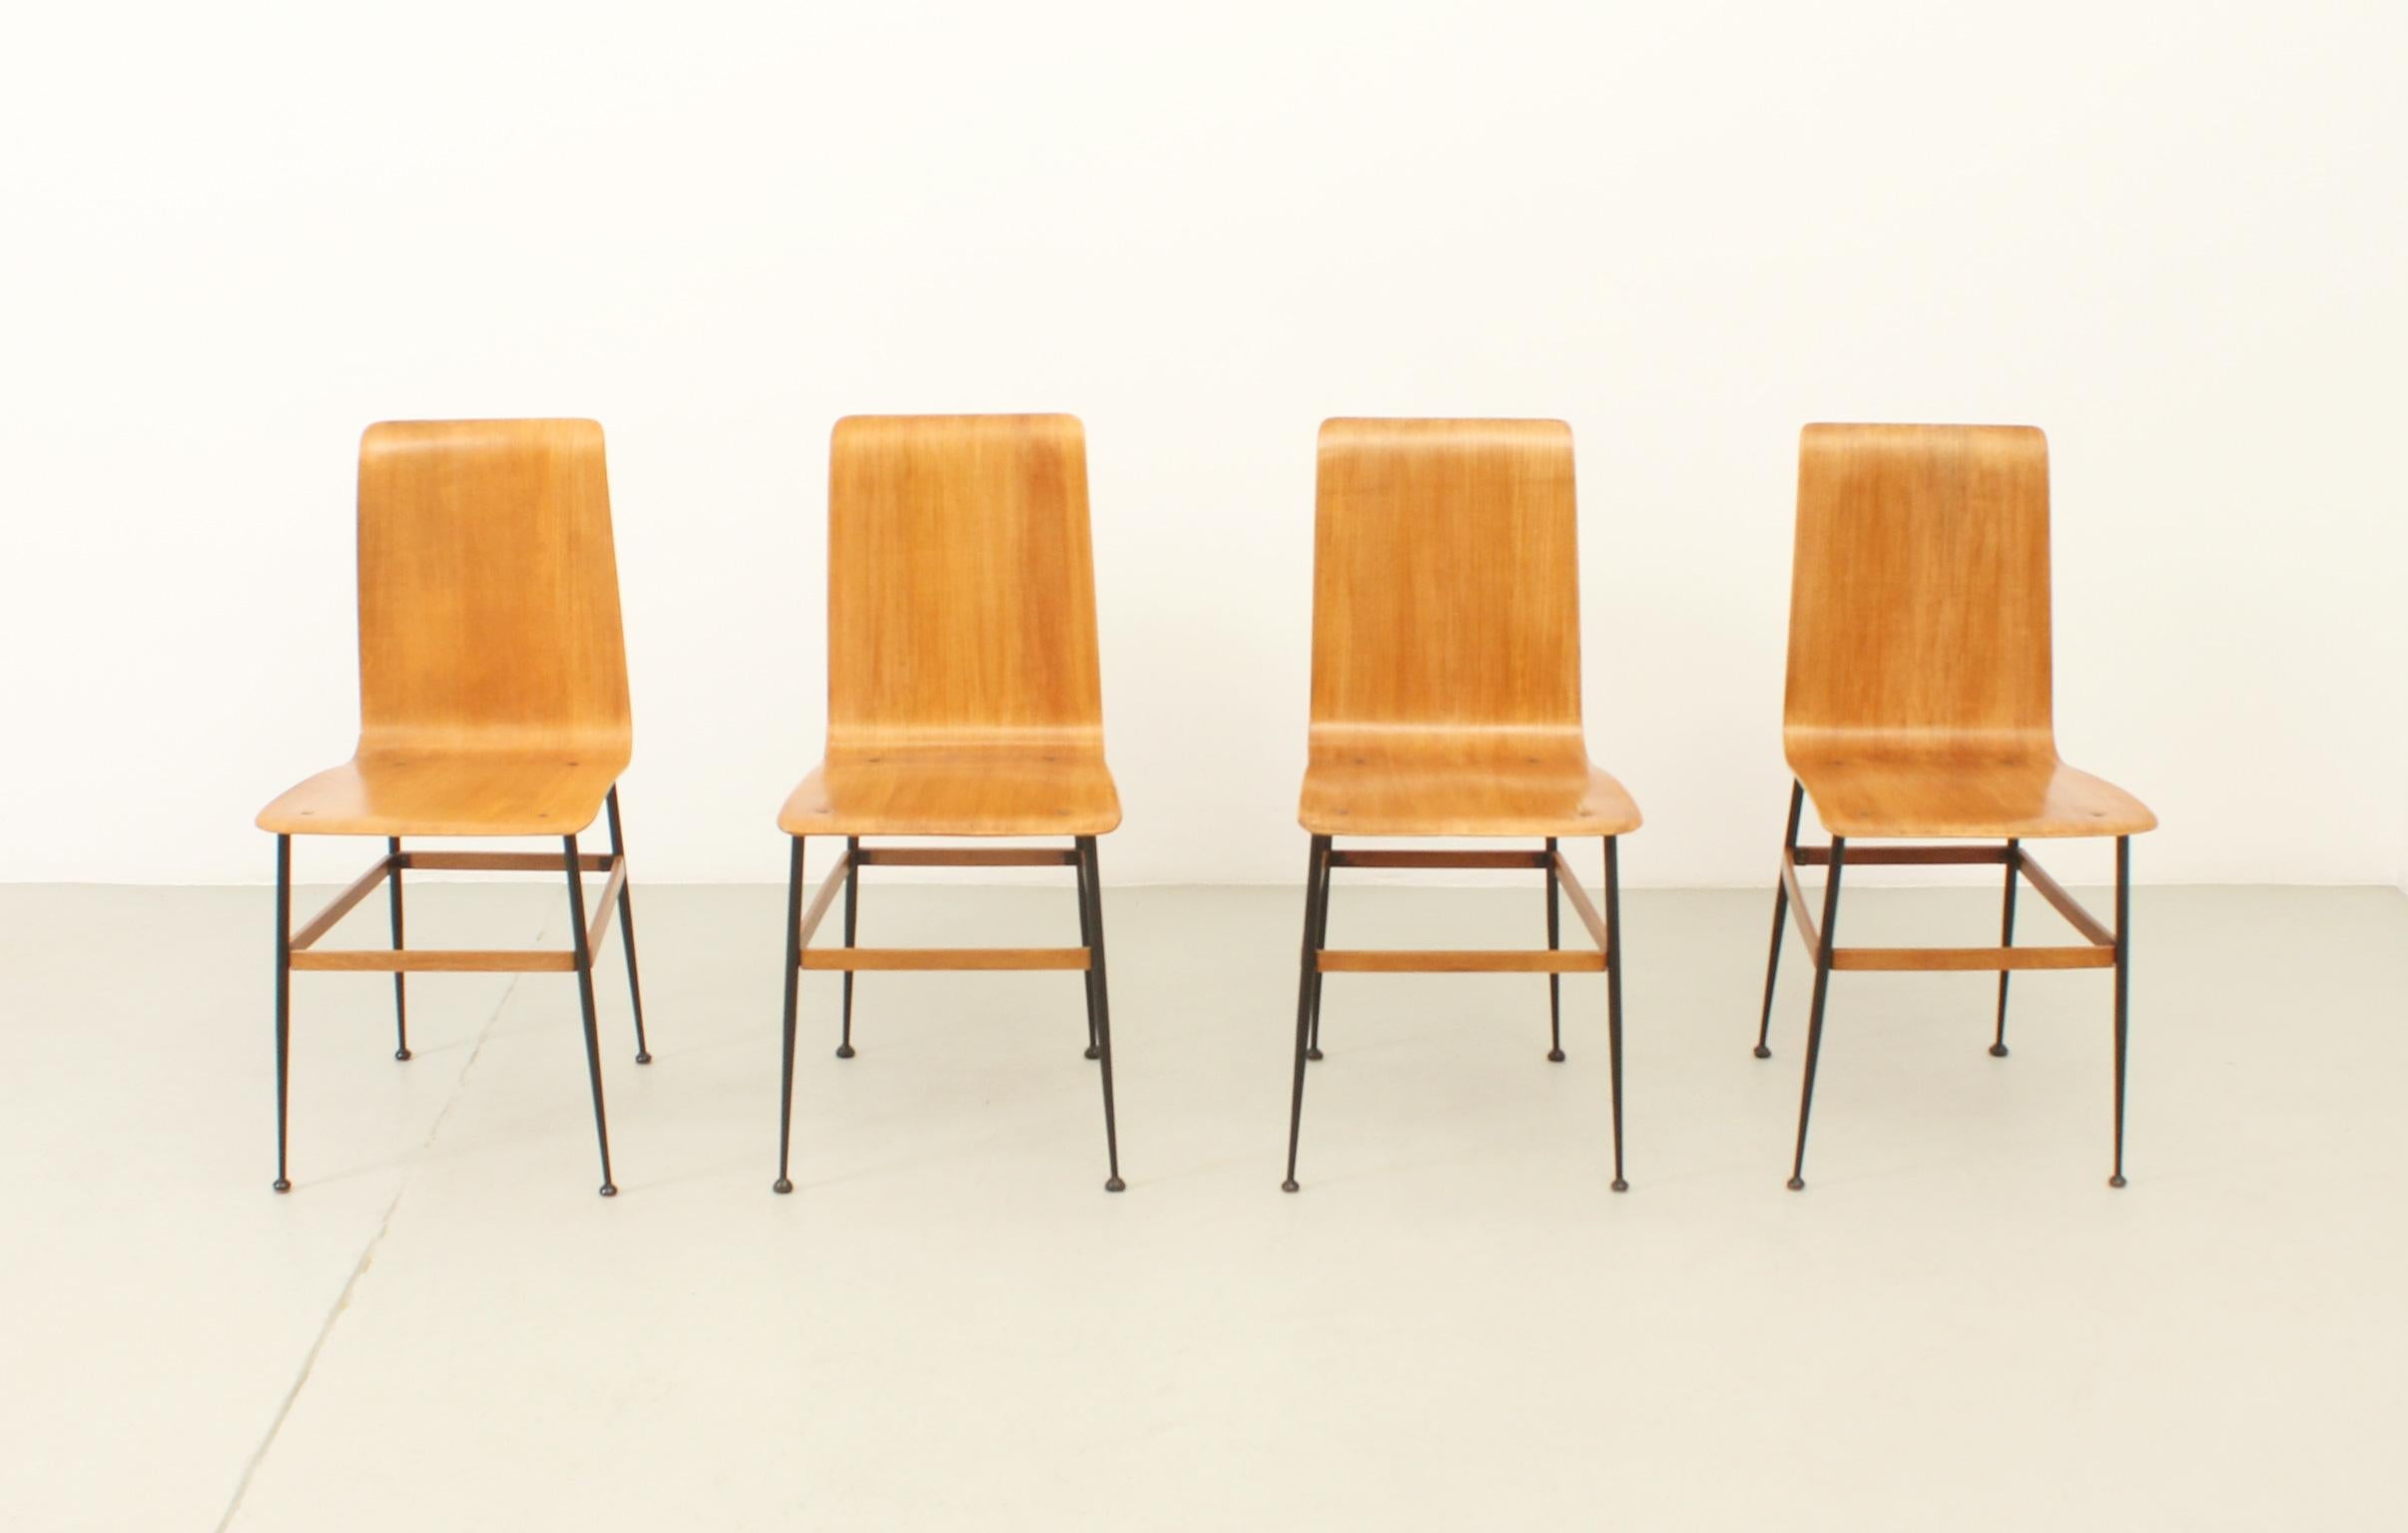 Italian Plywood Dining Chairs by Carlo Ratti, Italy, 1950s For Sale